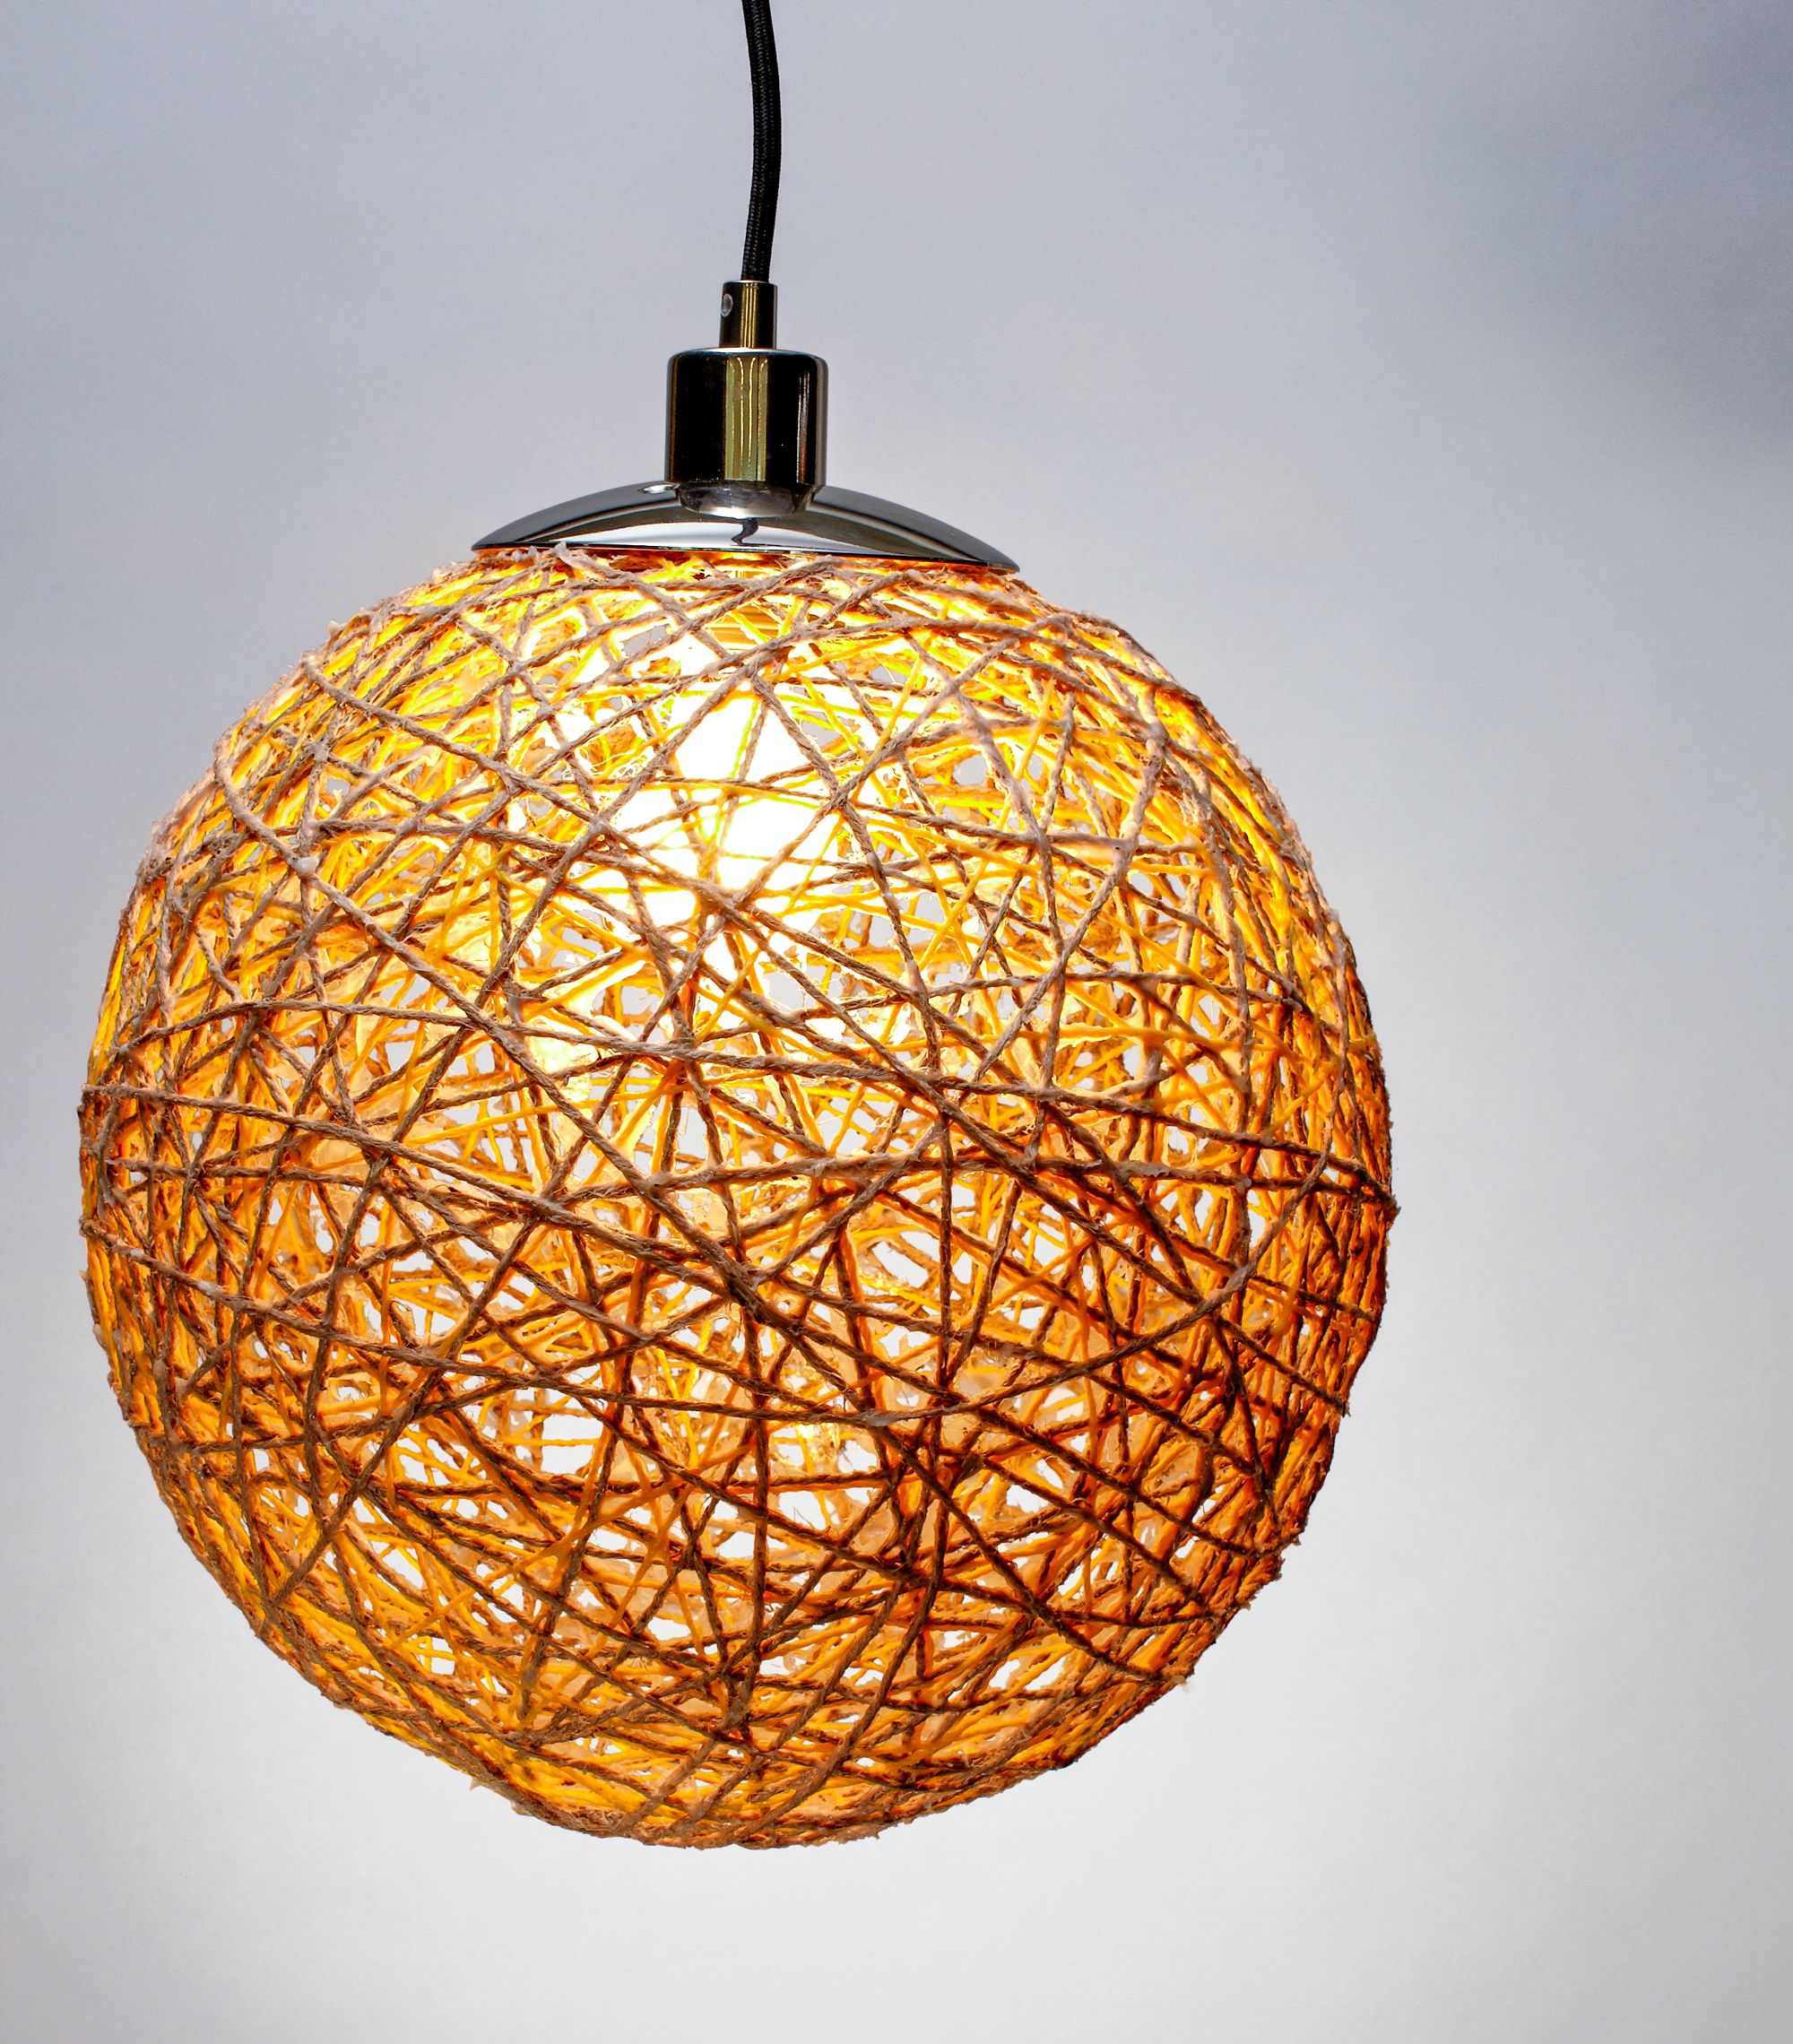 How To Make A Lampshade In 8 Easy Steps, How To Remove Pendant Light Shade